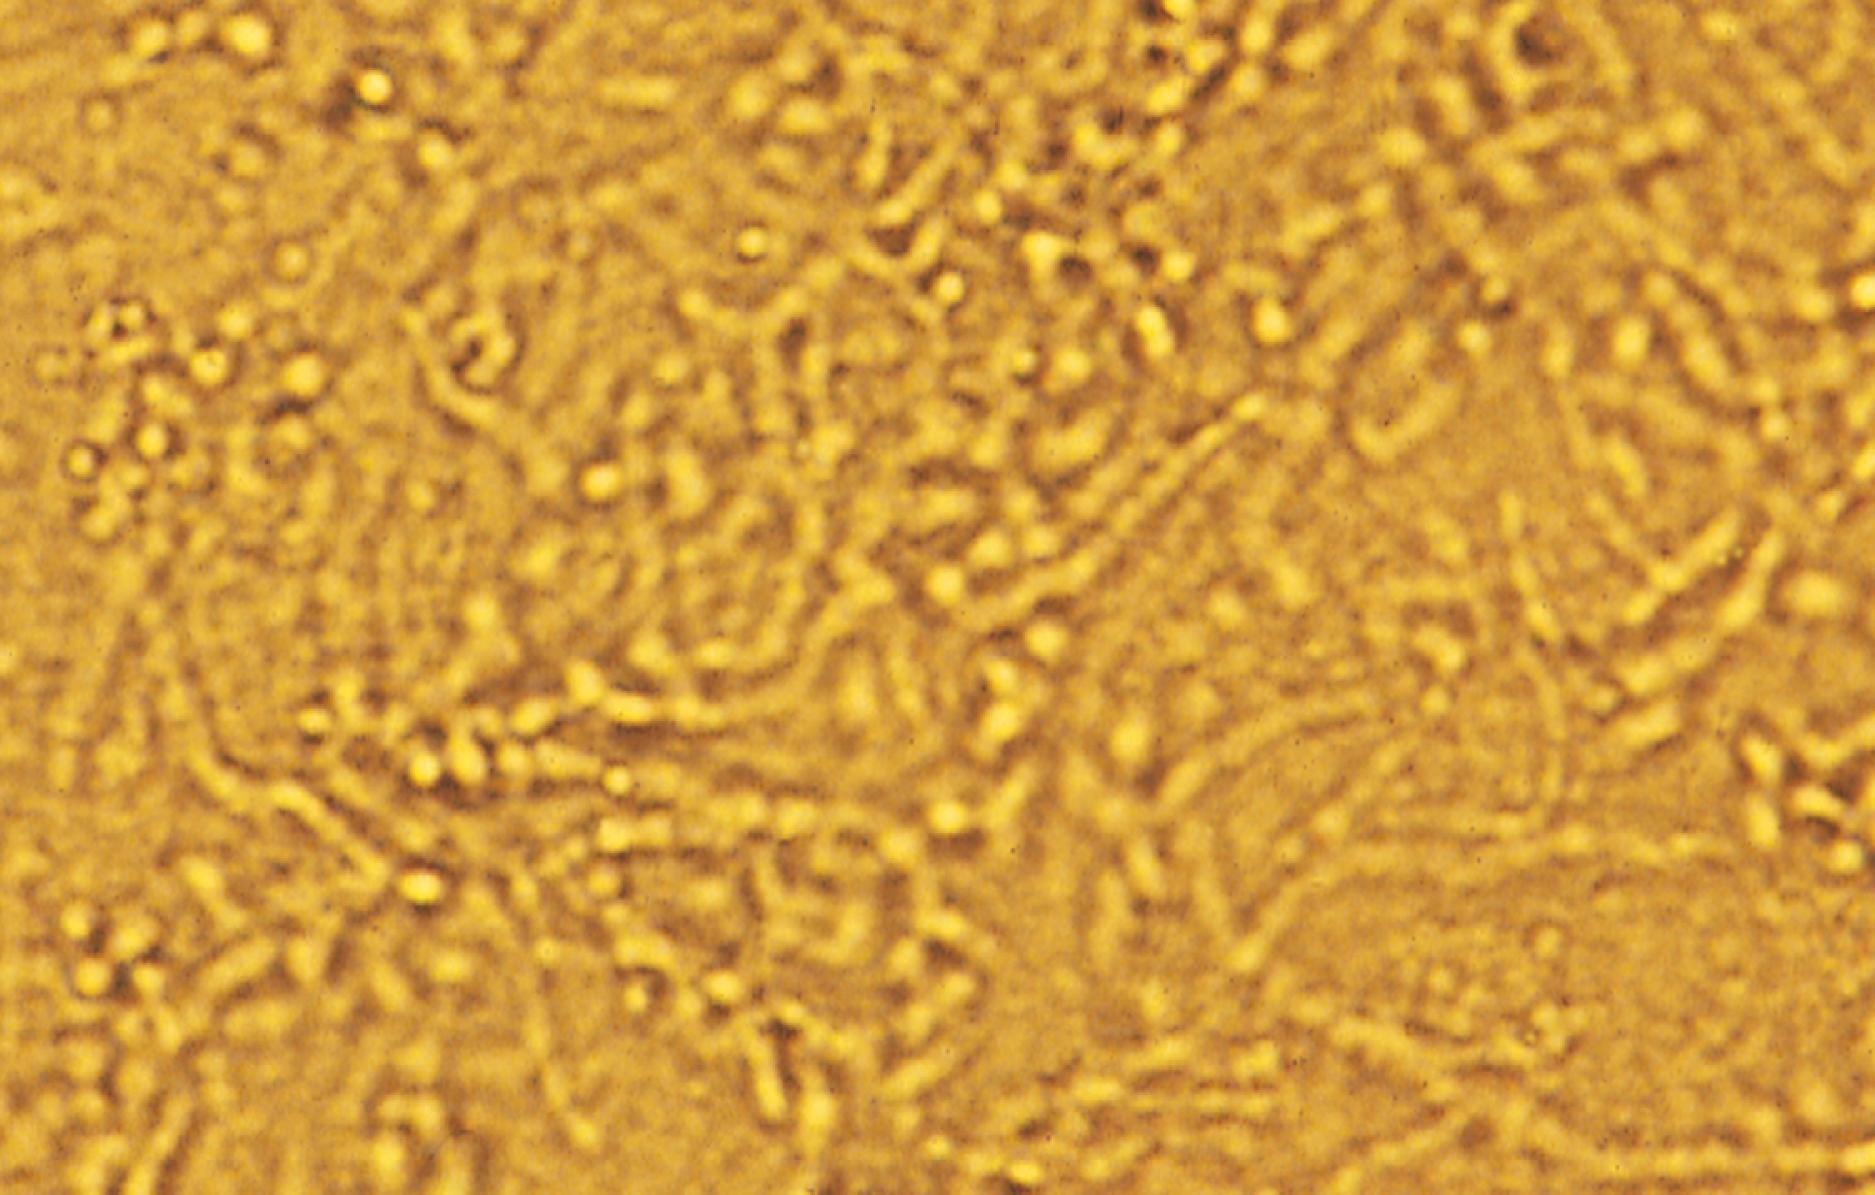 Fig. 8.44, Potassium hydroxide preparation of skin scrapings from an infant with candidal diaper dermatitis demonstrating pseudohyphae and spores.